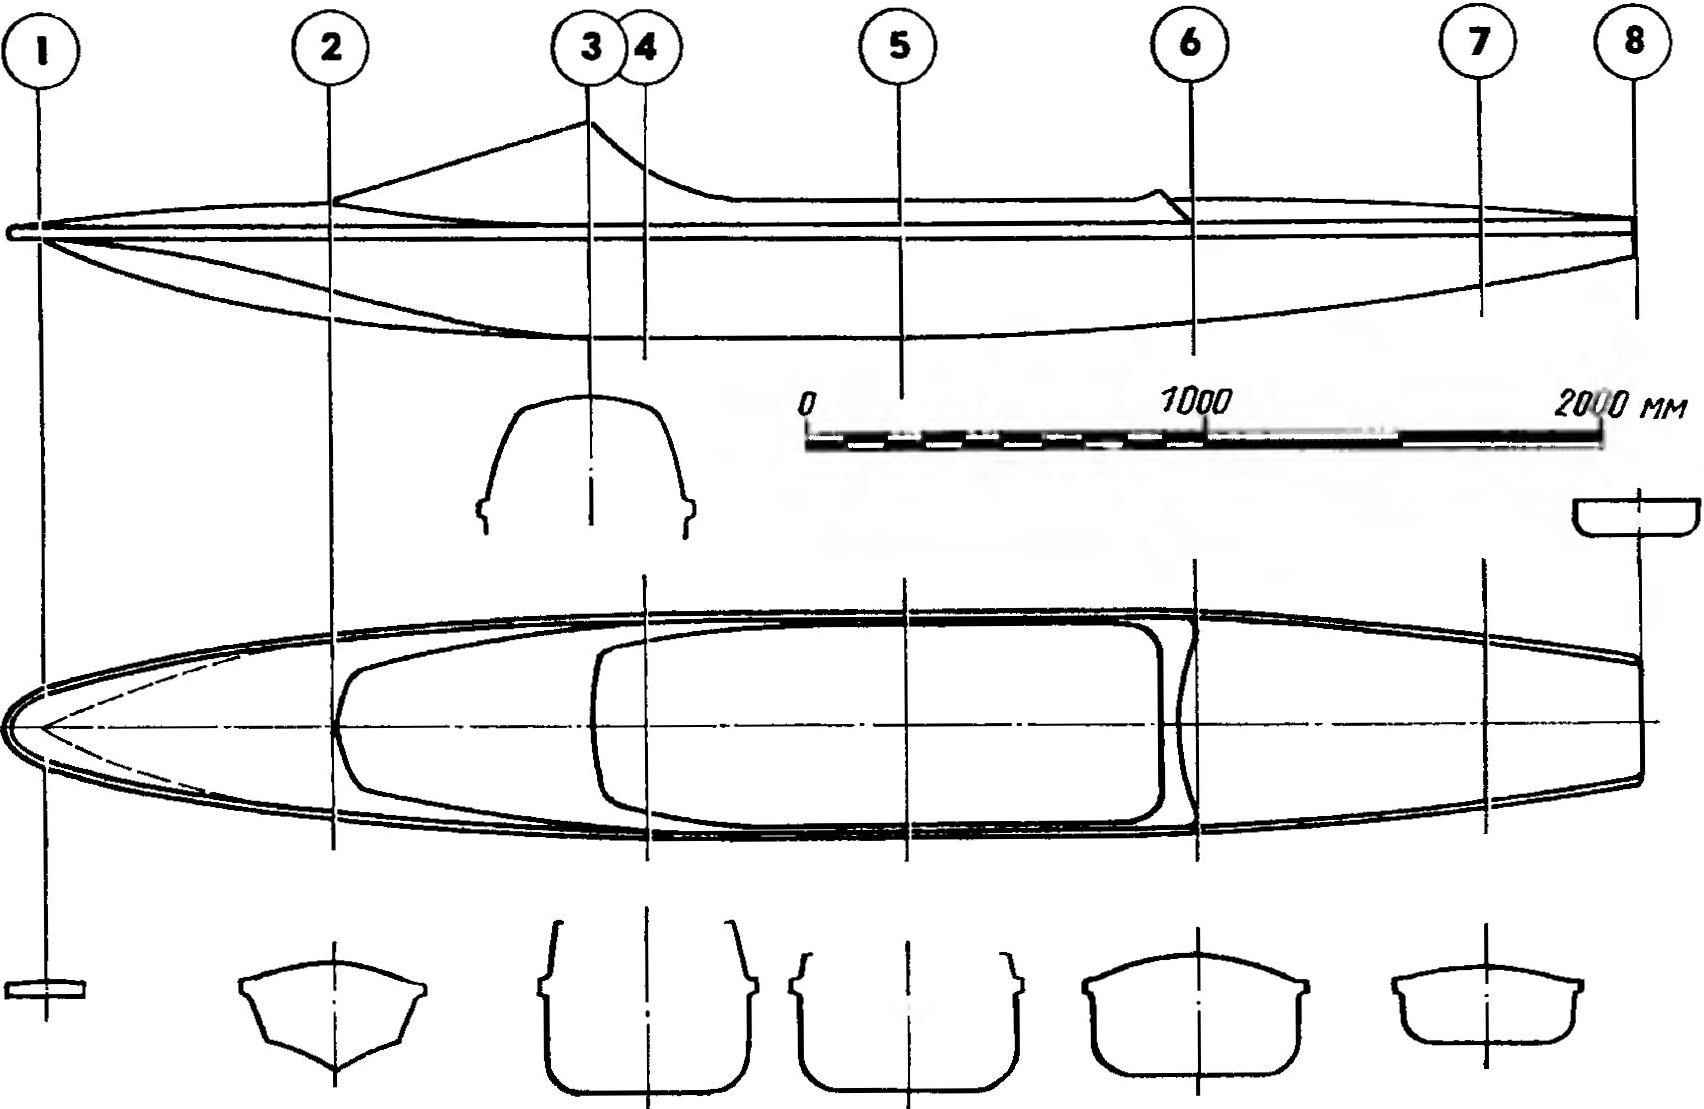 The theoretical drawing of the hull equiped